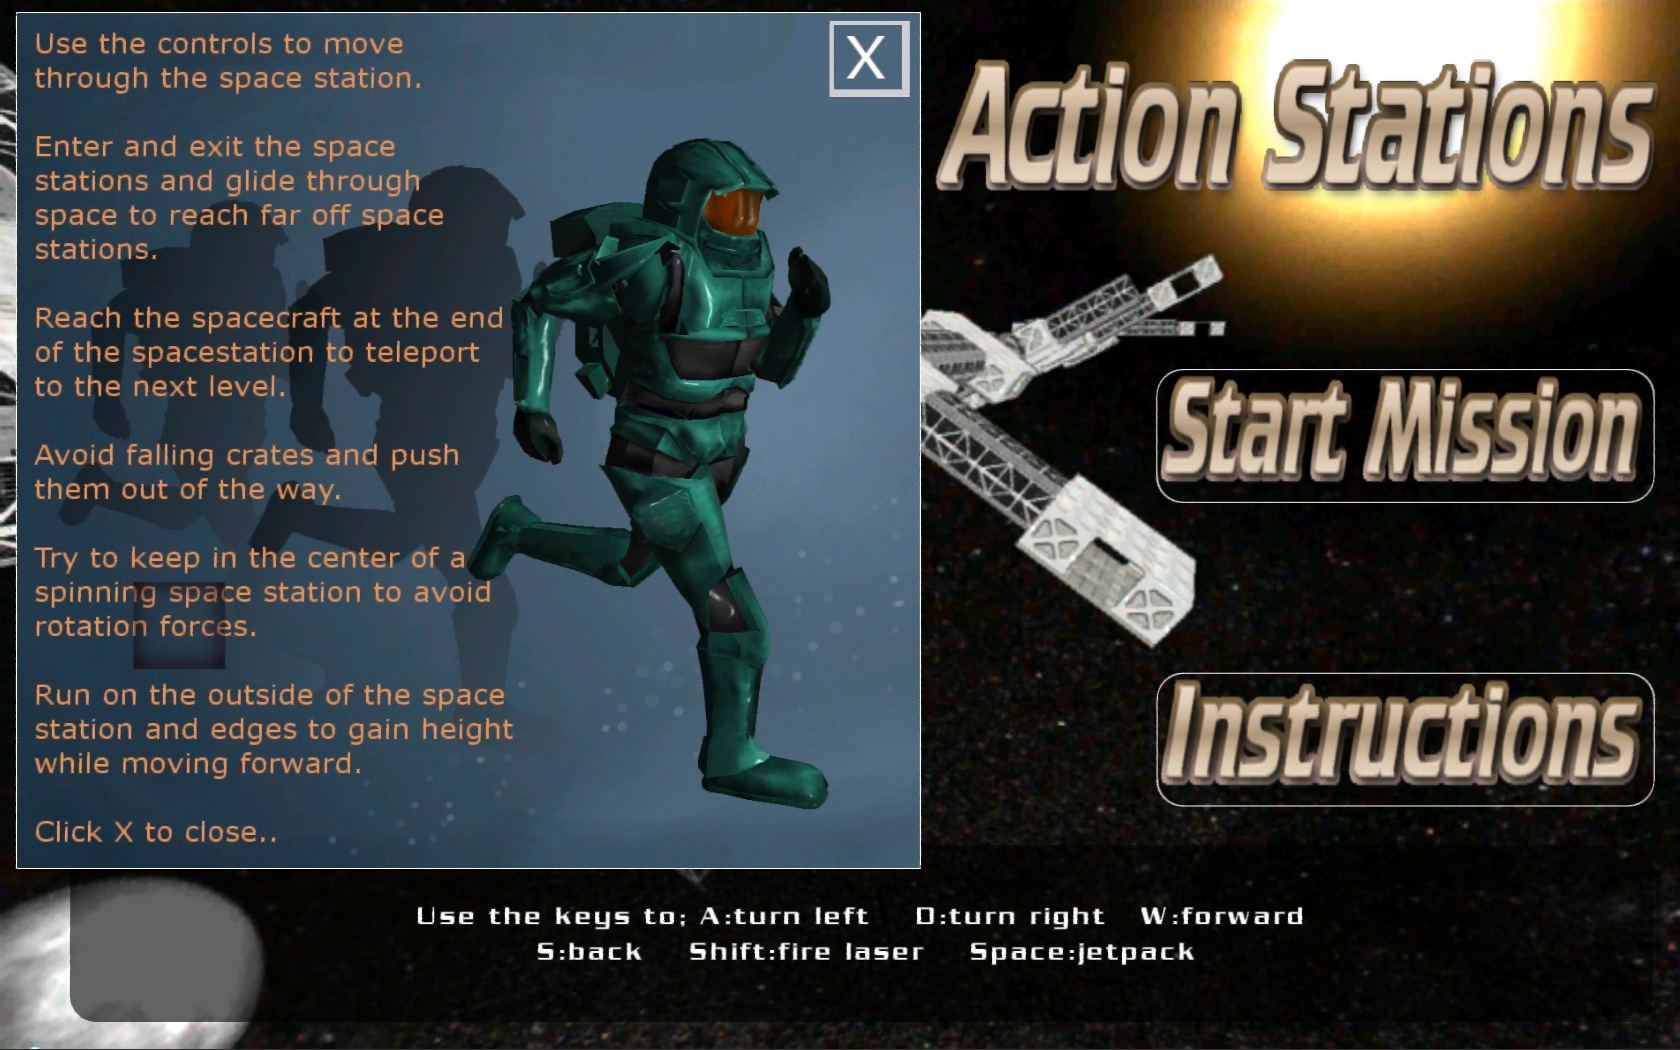 Action Stations 3D Space Mission 2.0 : How to play